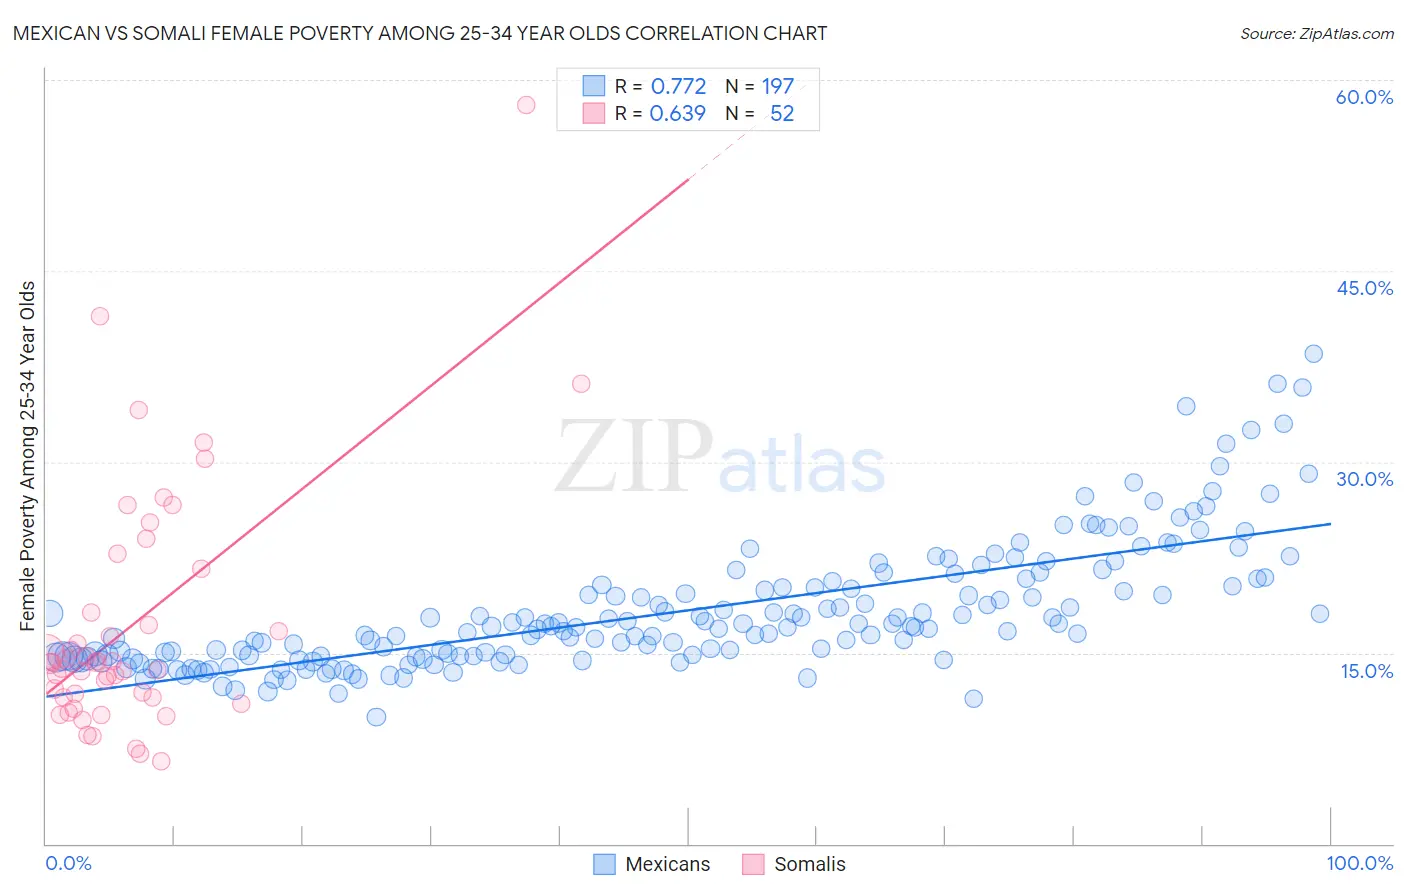 Mexican vs Somali Female Poverty Among 25-34 Year Olds